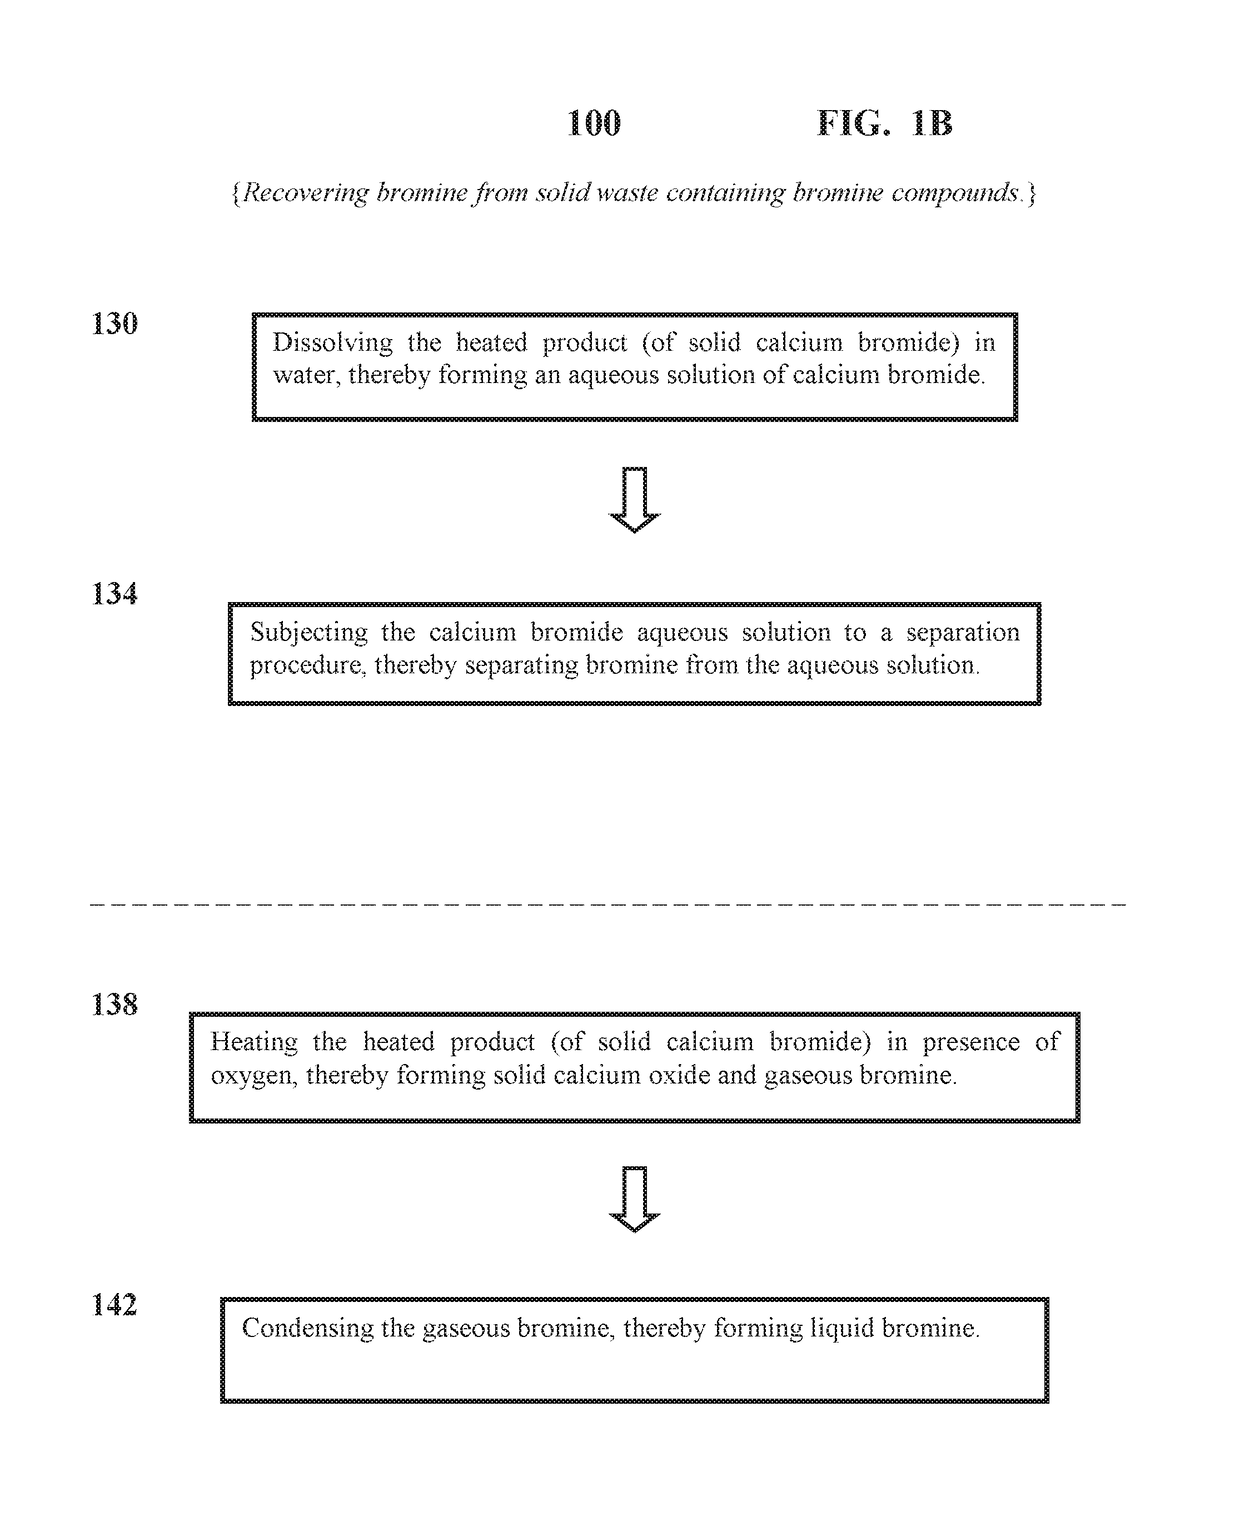 Recovering bromine from solid waste containing bromine compounds, and applications thereof